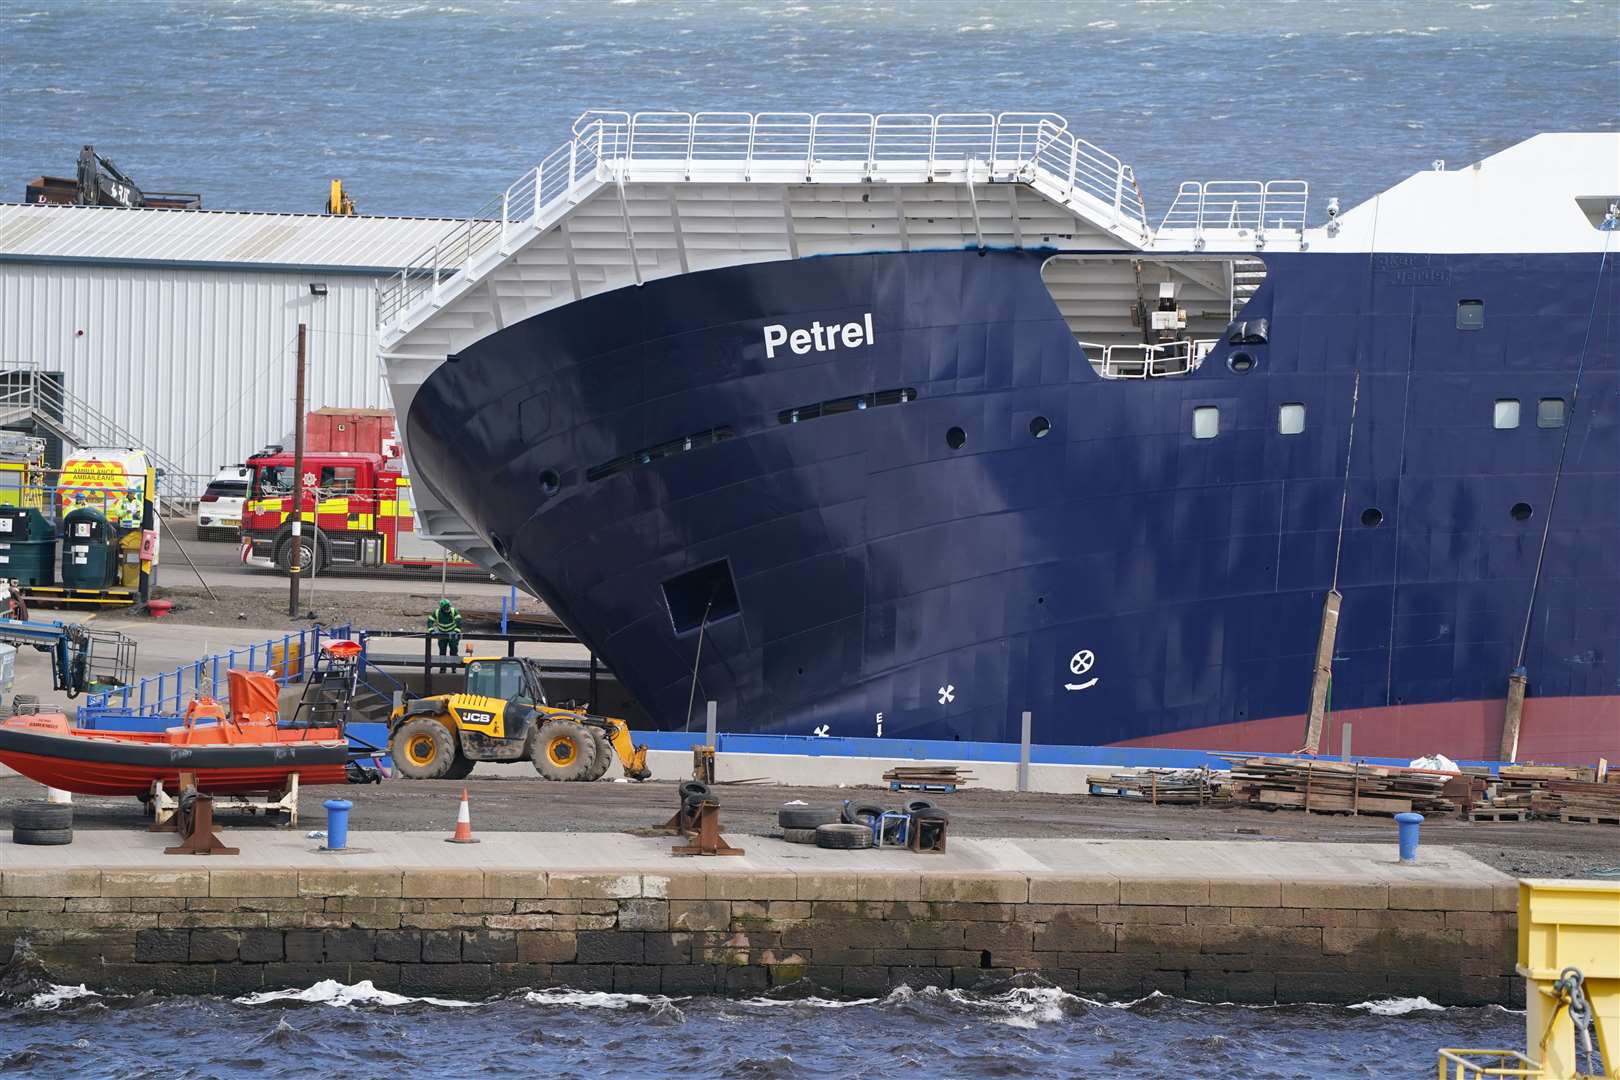 The vessel leaning on its side following the incident at Imperial Dock in Leith (Andrew Milligan/PA)